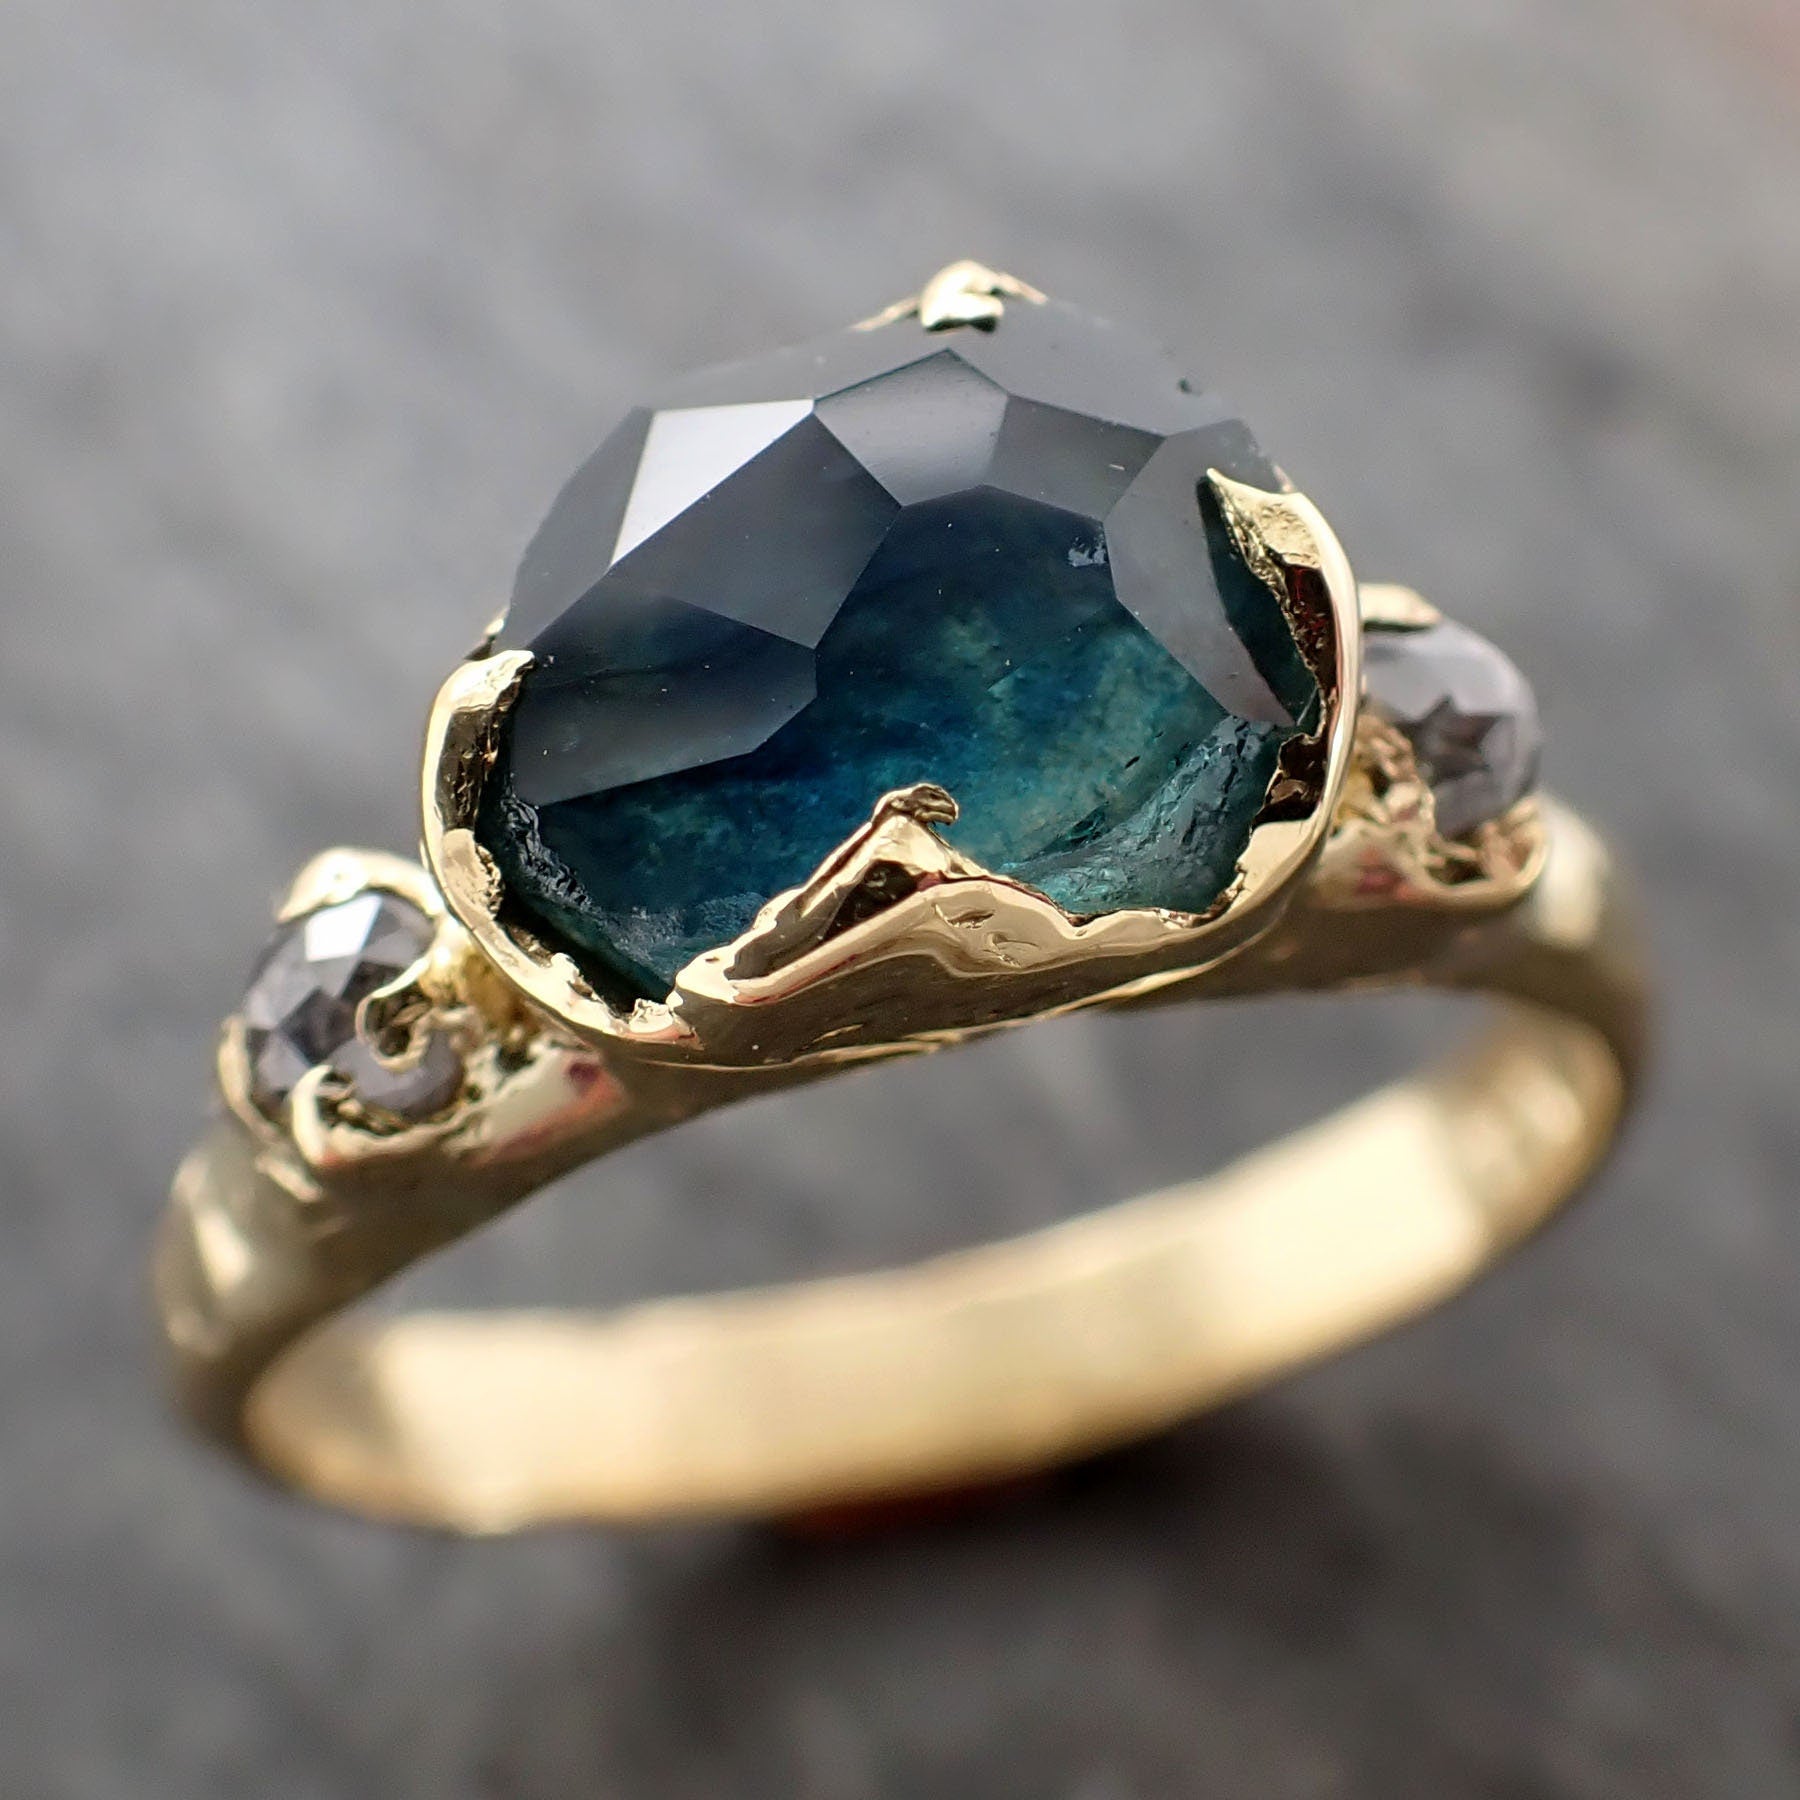 Juno | Oval Teal Moissanite Ring (1.92ctw) | Kristin Coffin Jewelry